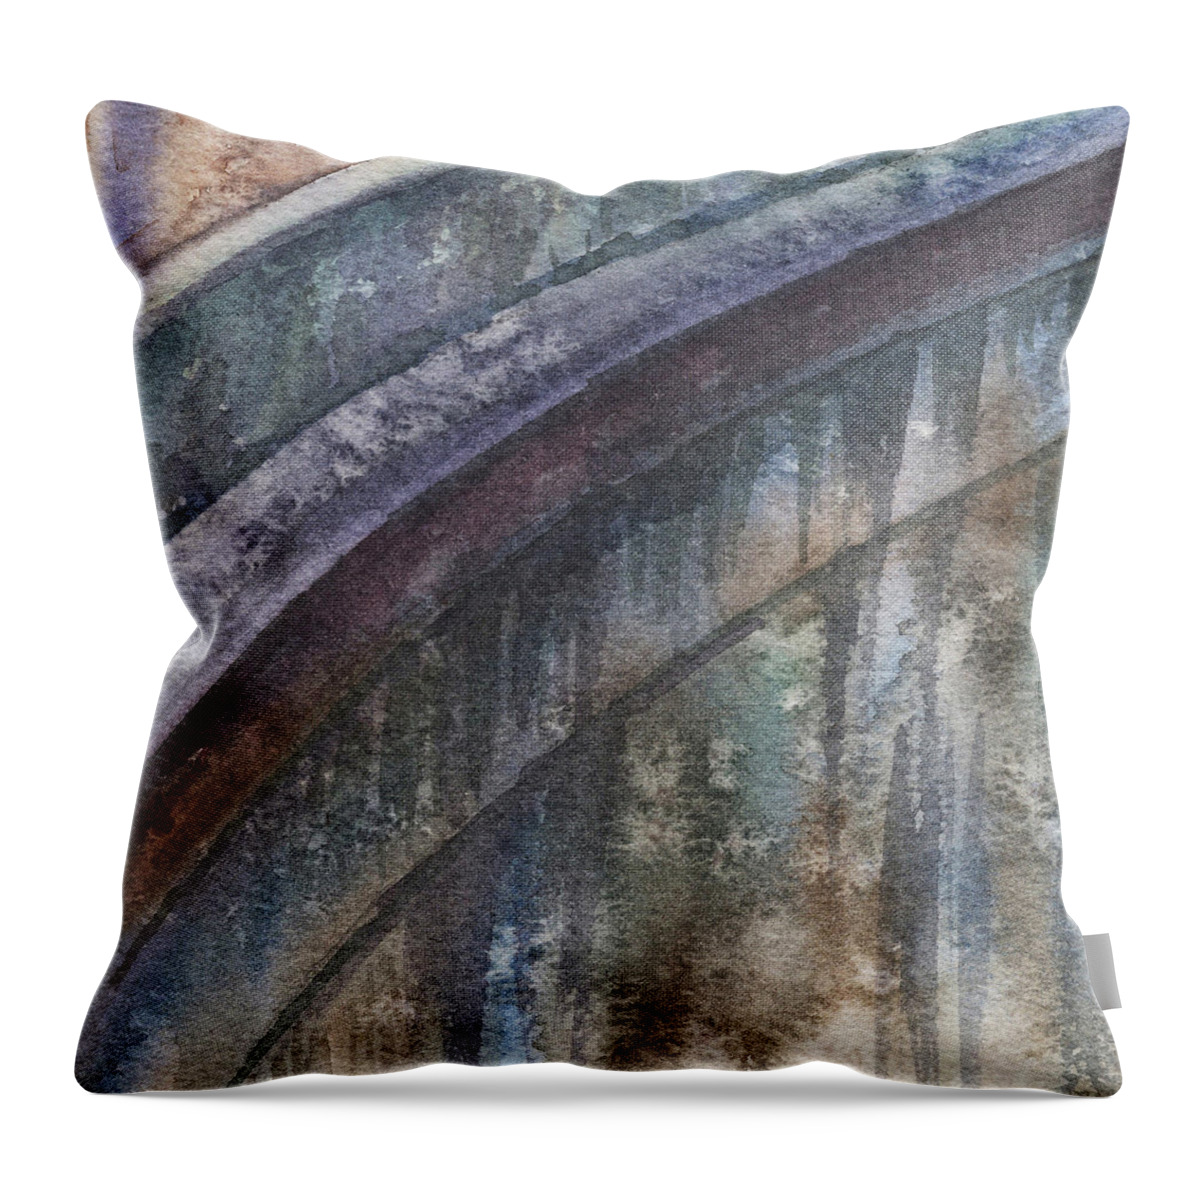 Marble Throw Pillow featuring the painting Rustic Marble And Granite Abstract Decorative Art II by Irina Sztukowski